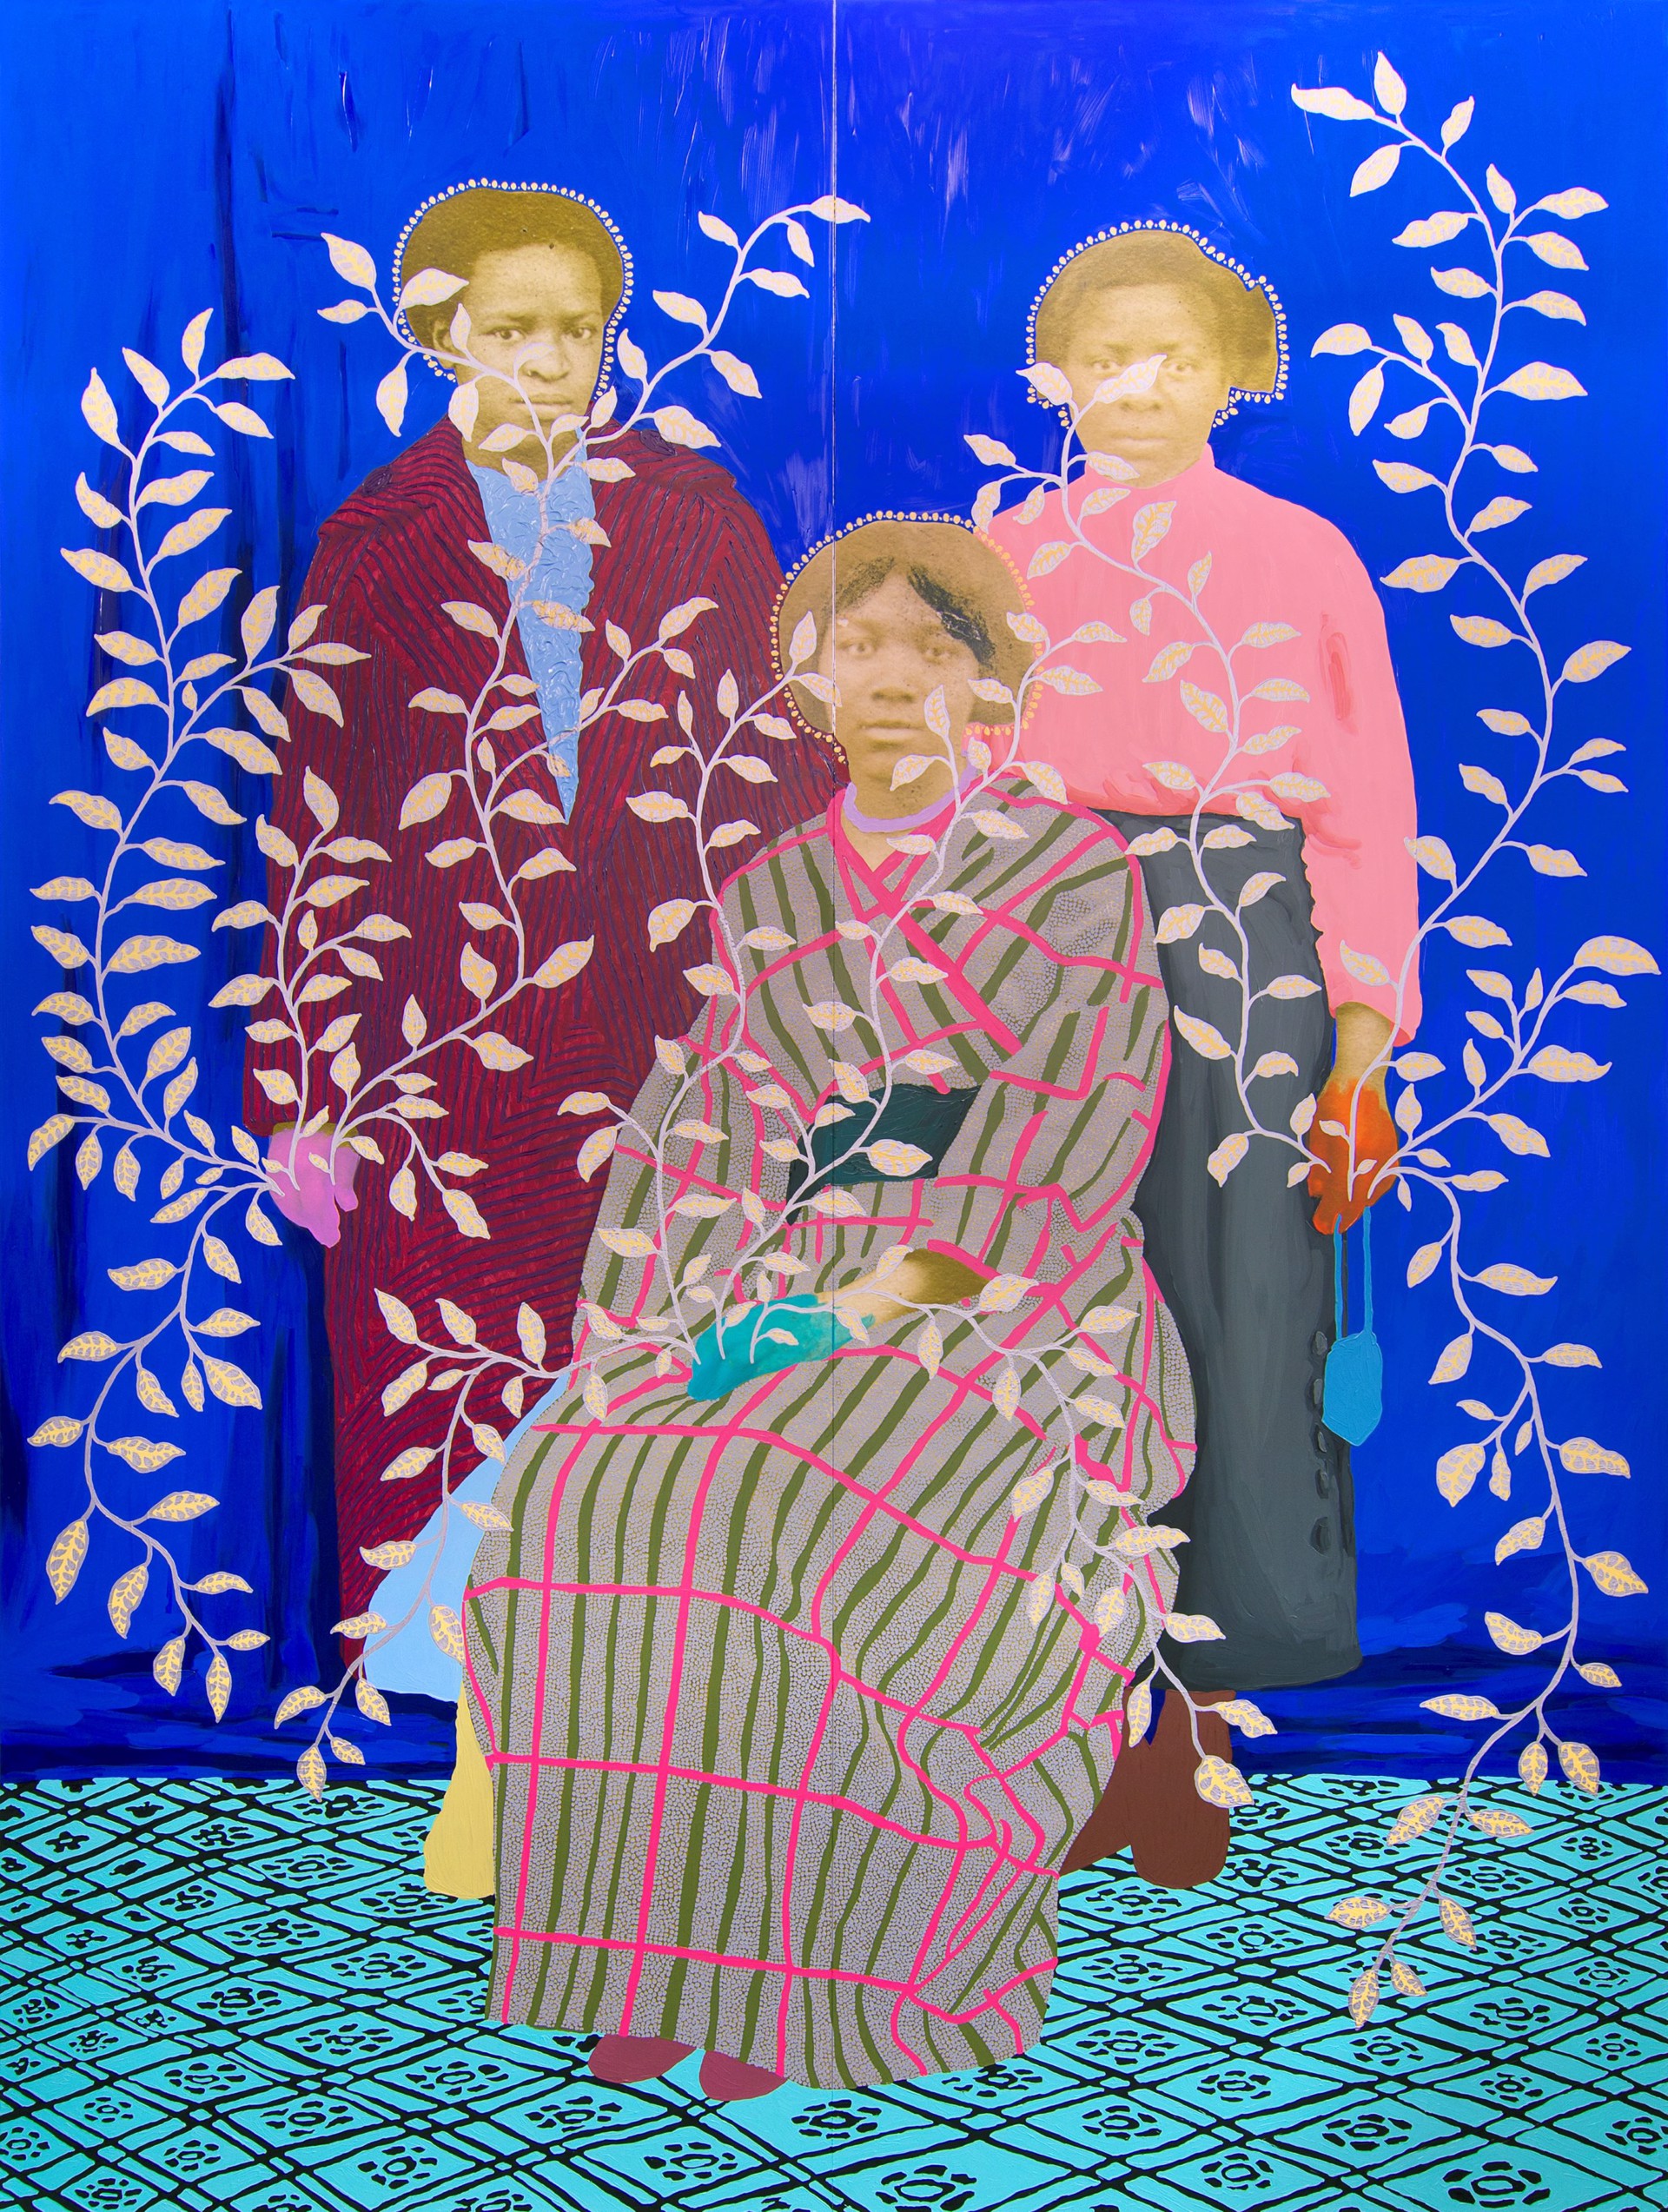 Untitled (Three Women with Blue Curtain and Silver and Yellow Leaves) by Daisy Patton